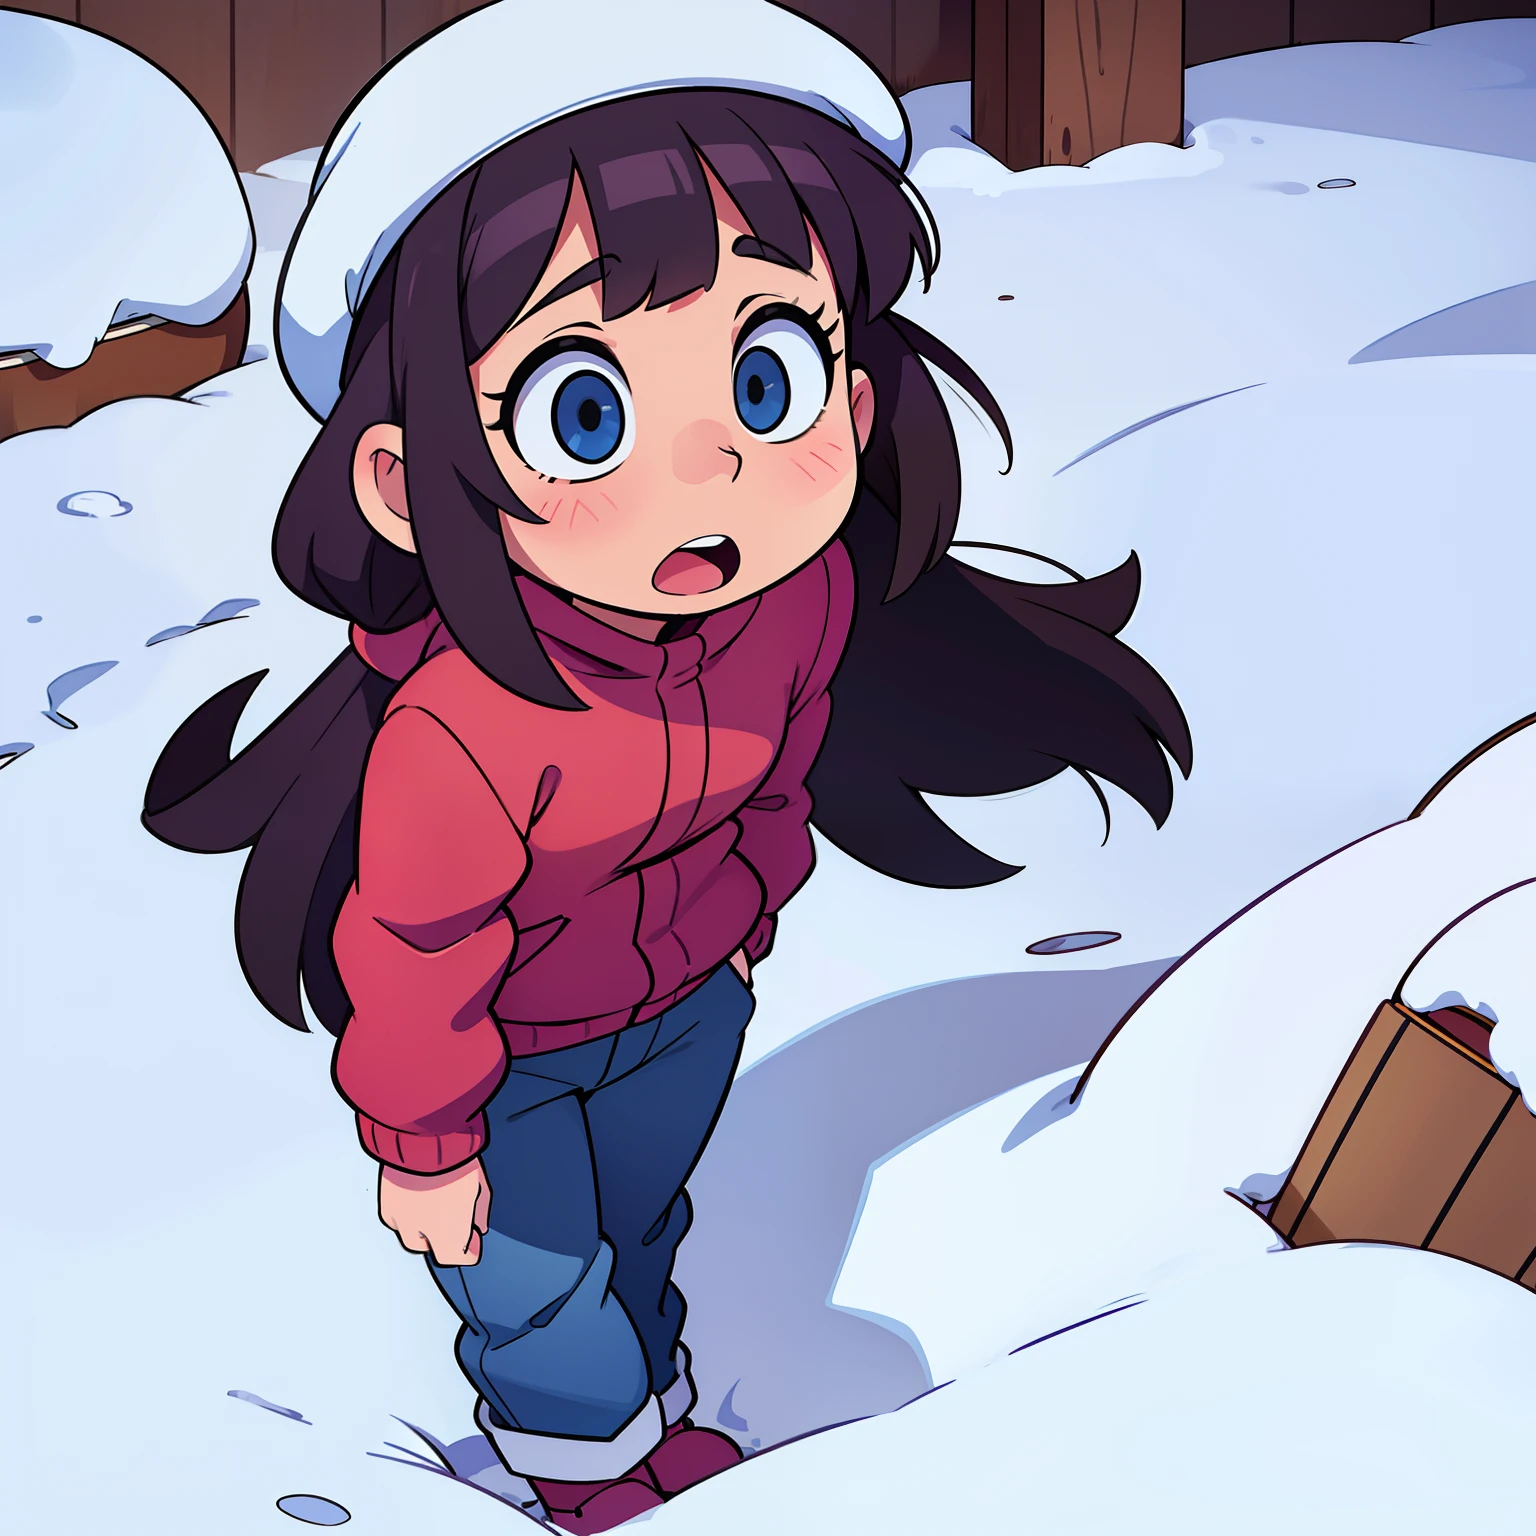  buried in the snow, pants pulled down with shocked expression